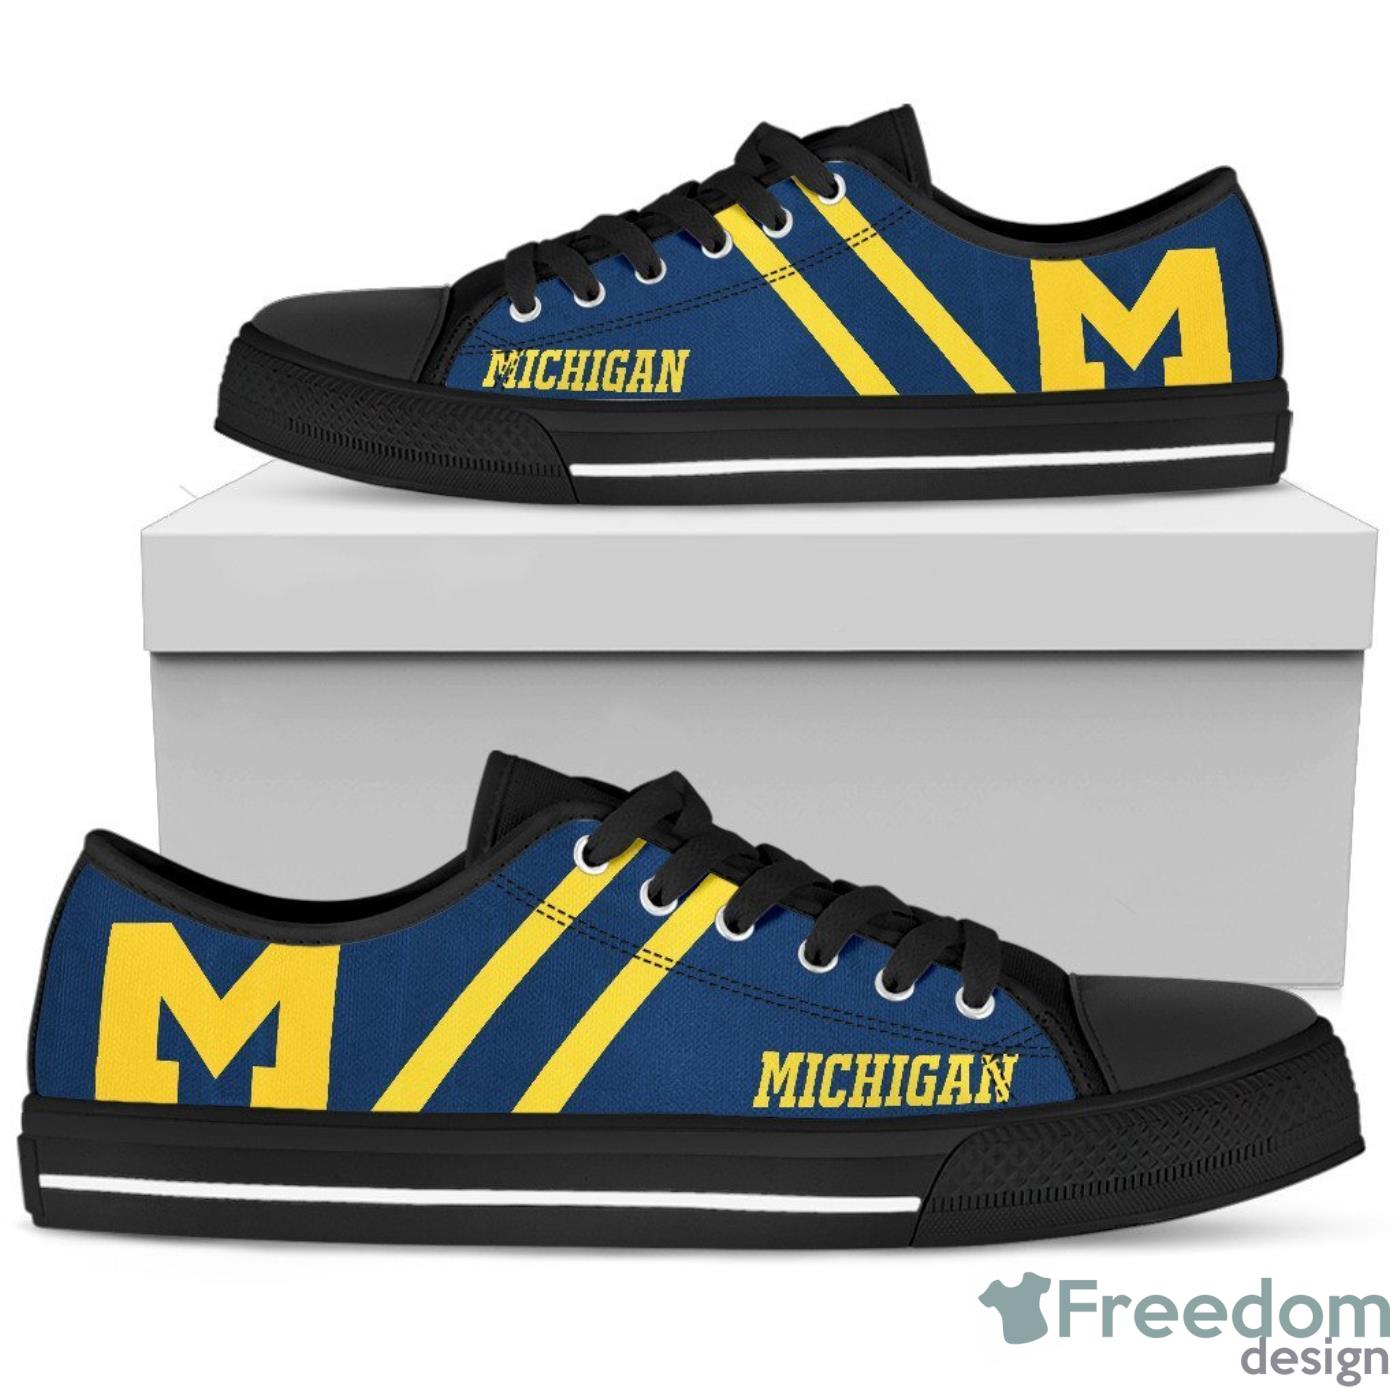 Michigan Wolverines Low Top Canvas Shoes For Men And Women Product Photo 1